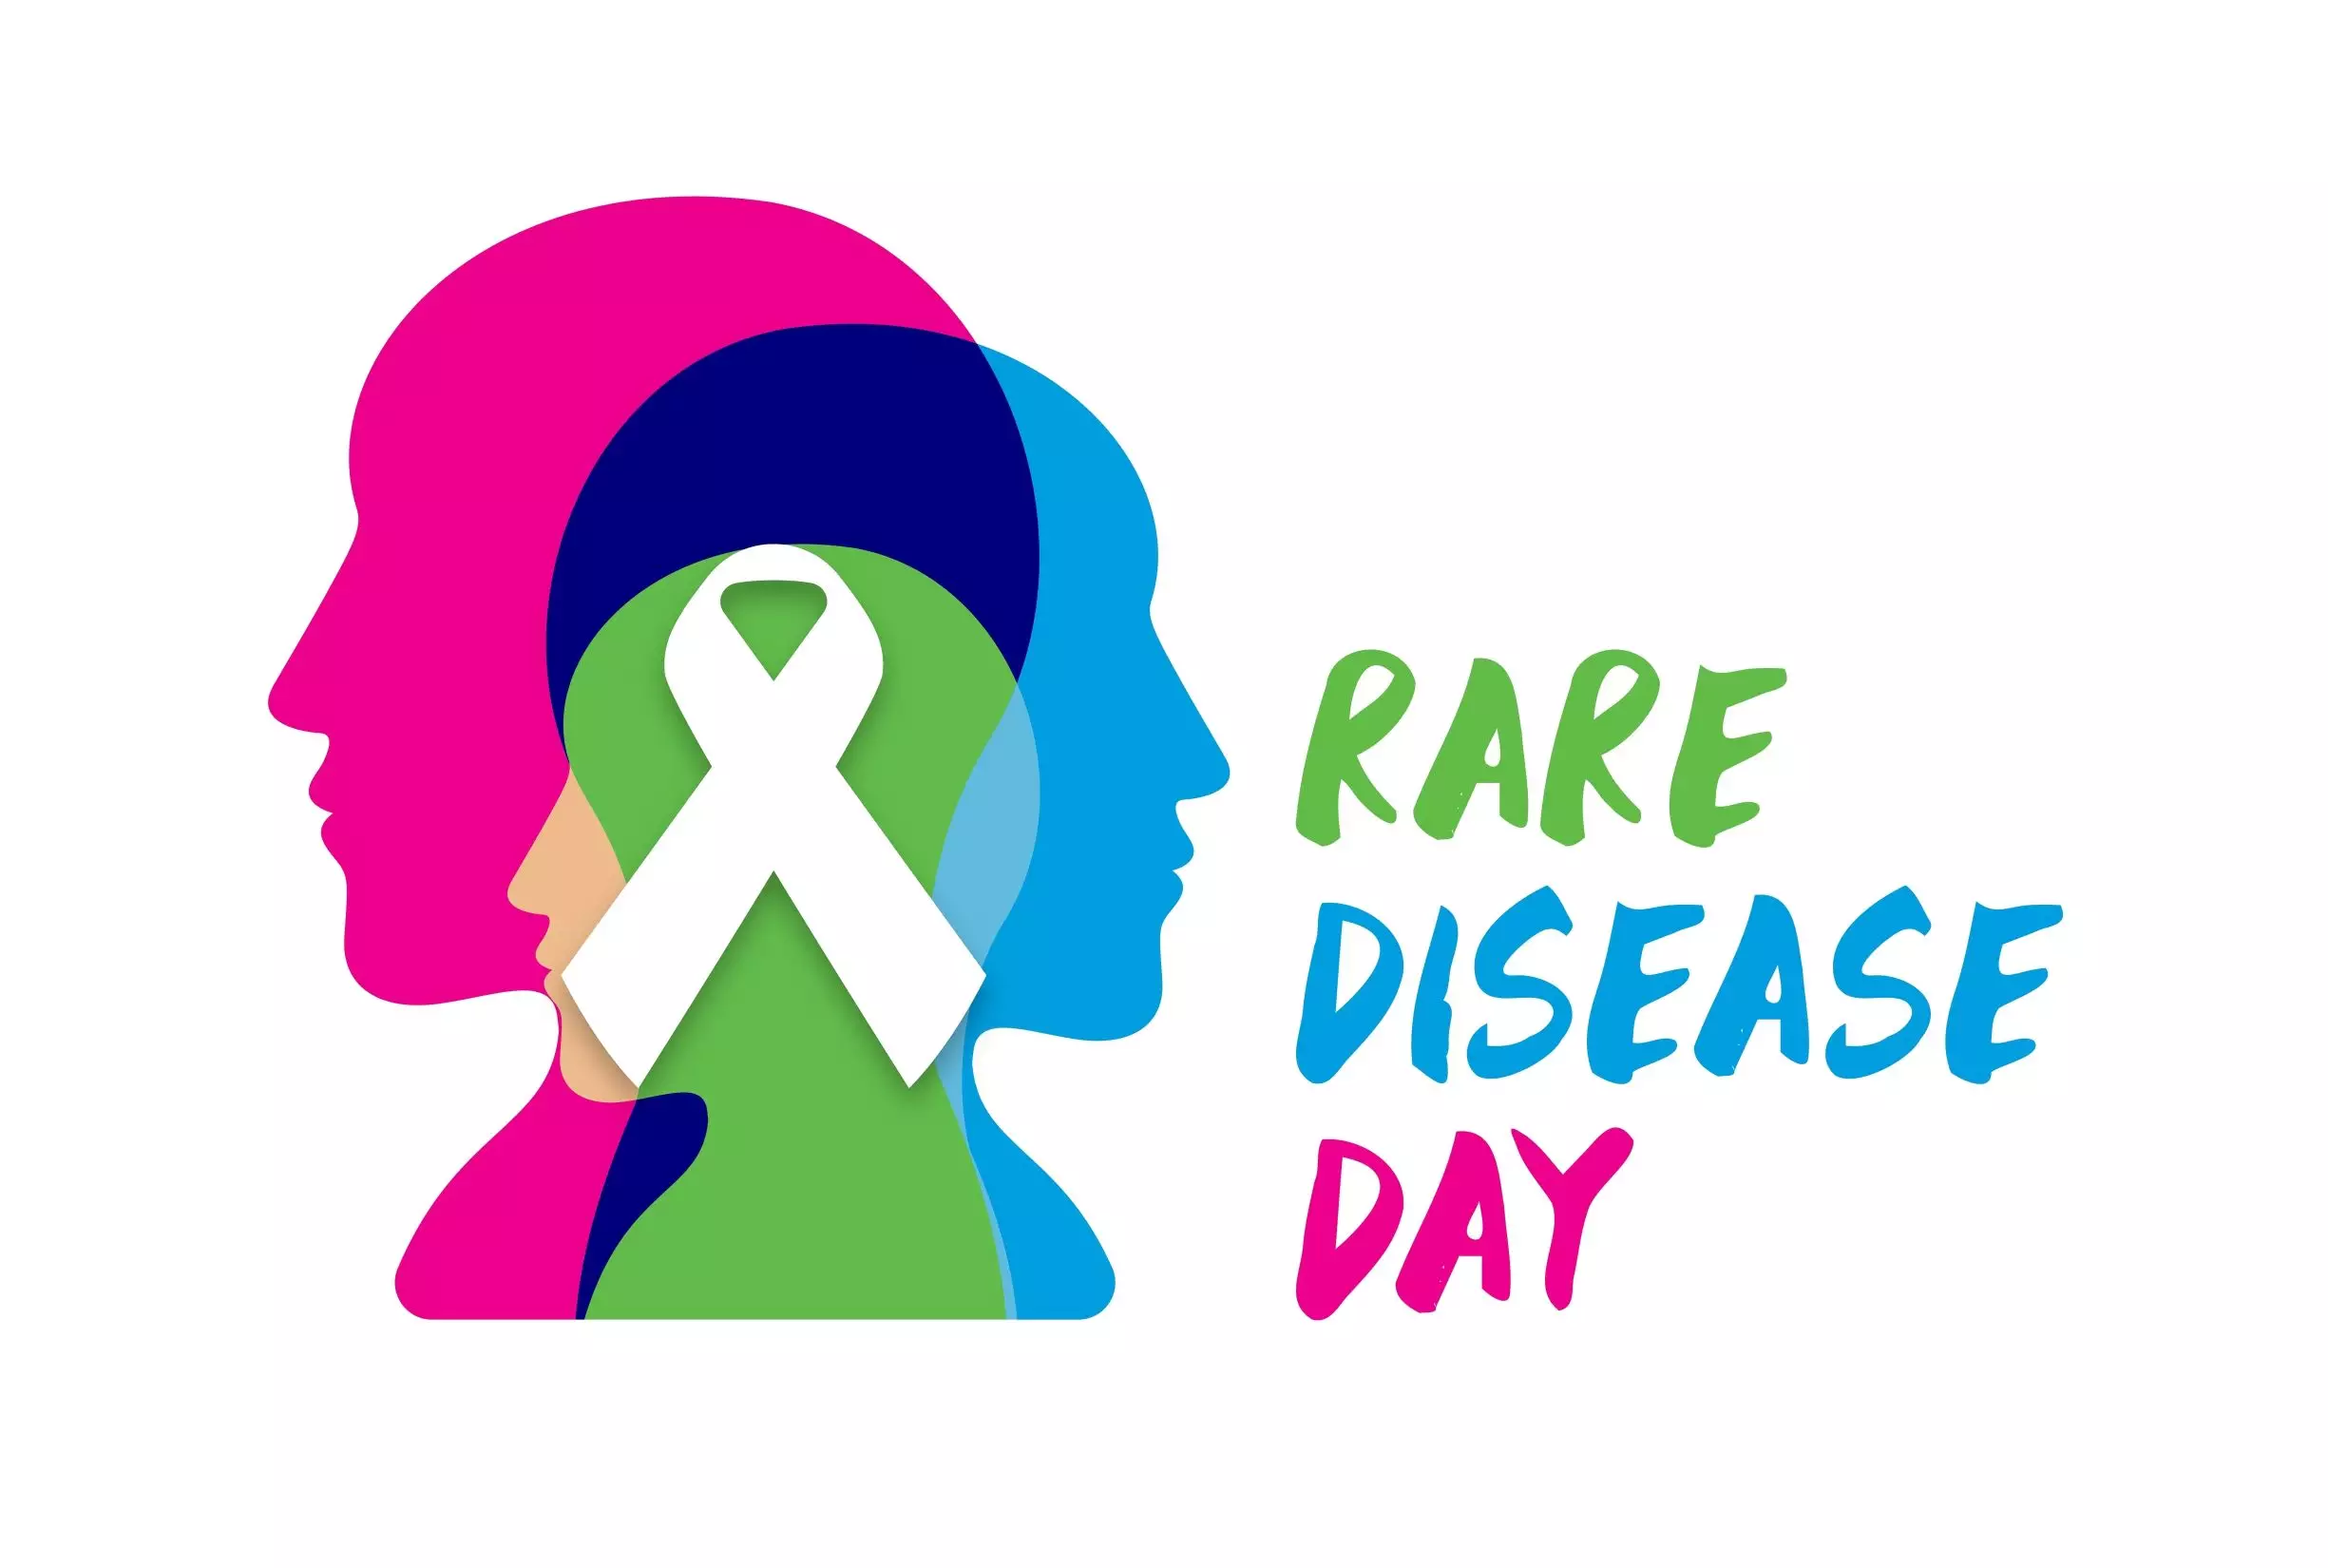 Why Is Spreading Awareness of Rare Diseases so Important?